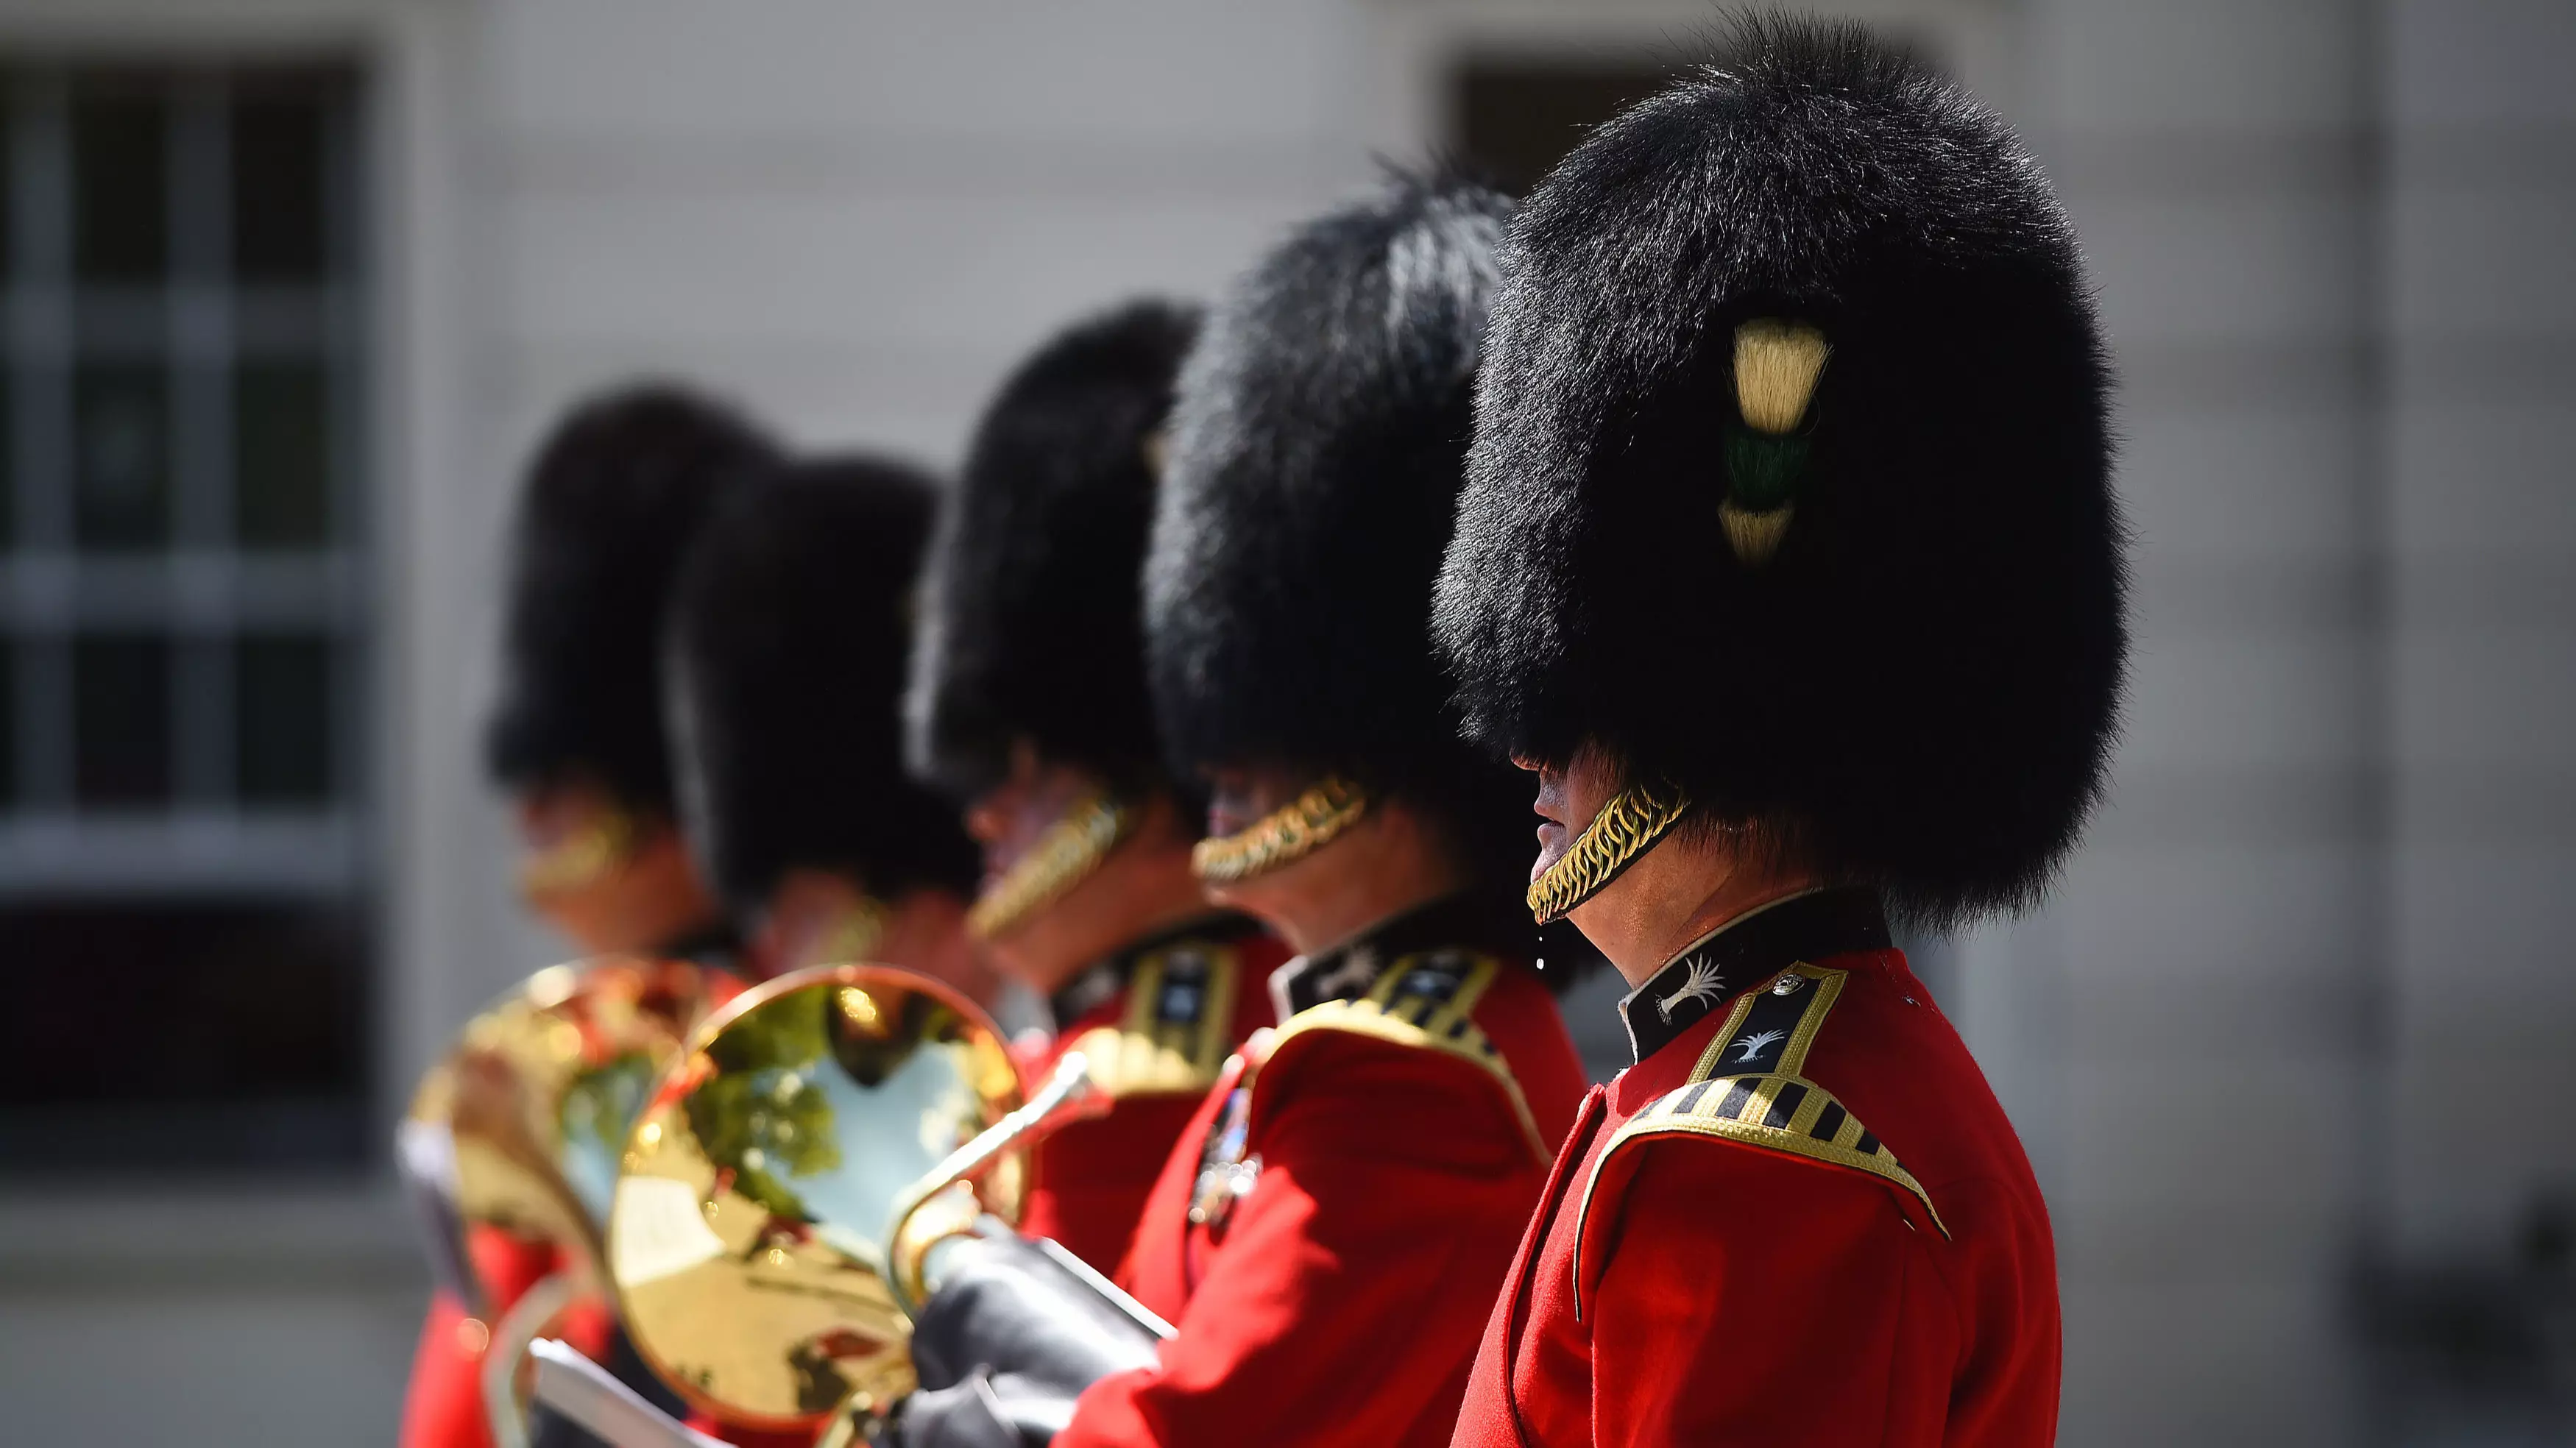 Two Queen's Guards Arrested Over Plot To Steal Bullets